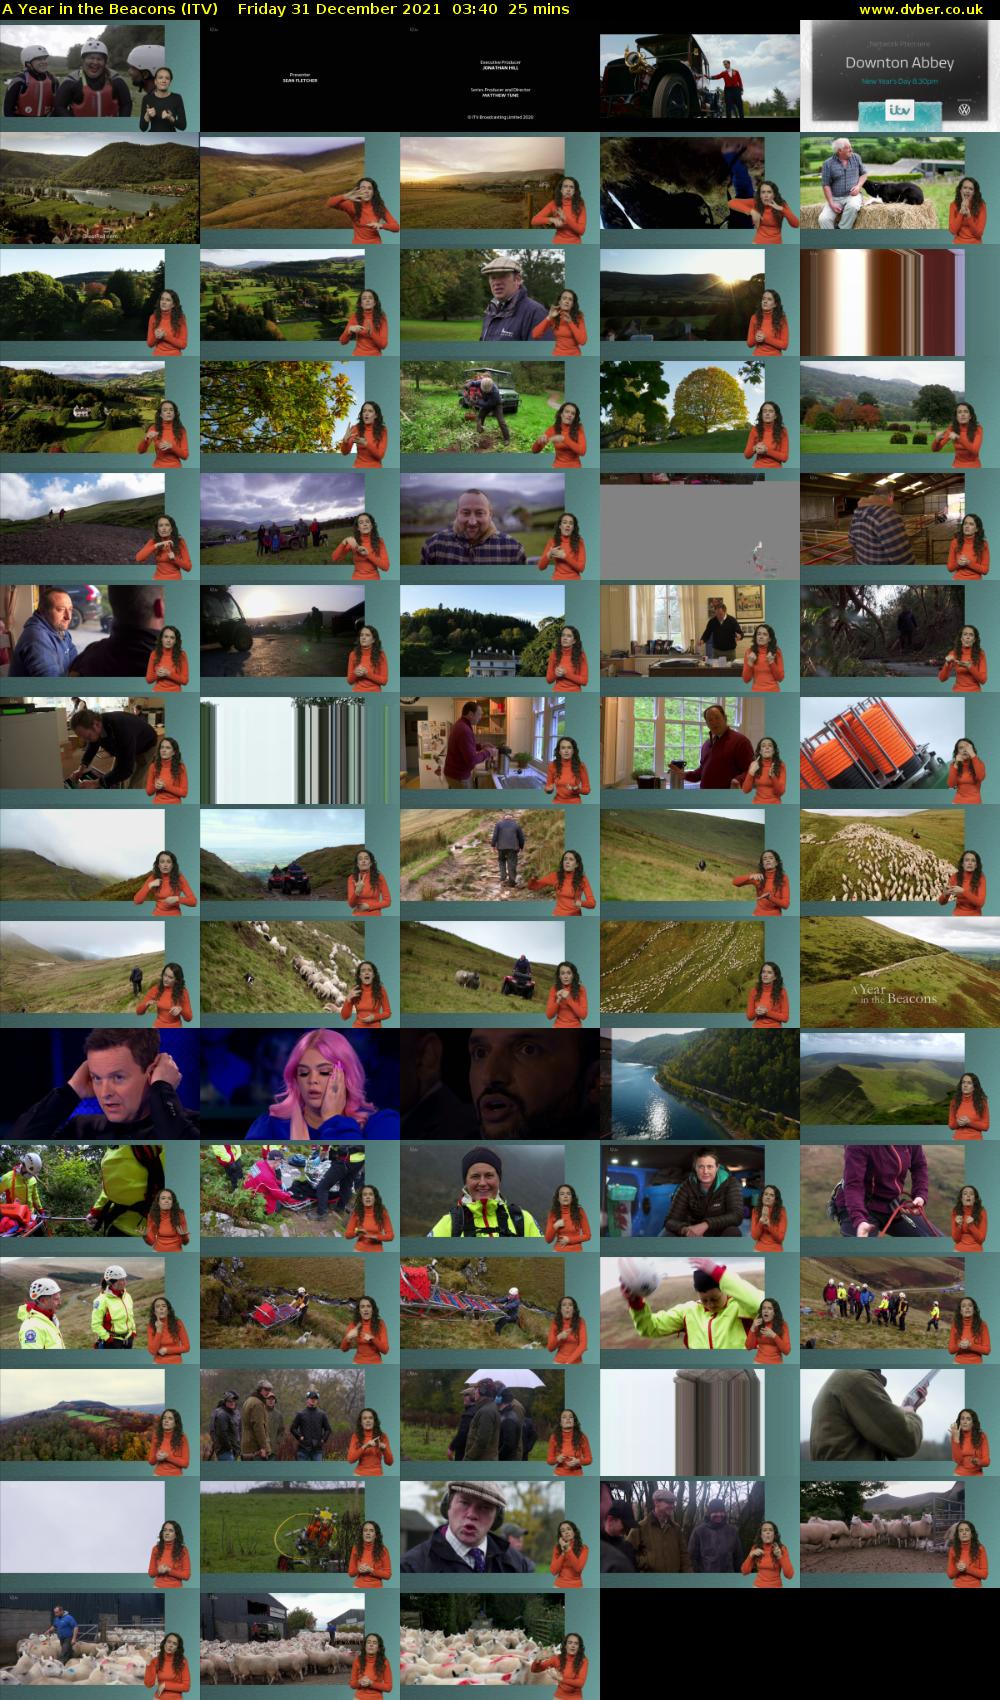 A Year in the Beacons (ITV) Friday 31 December 2021 03:40 - 04:05